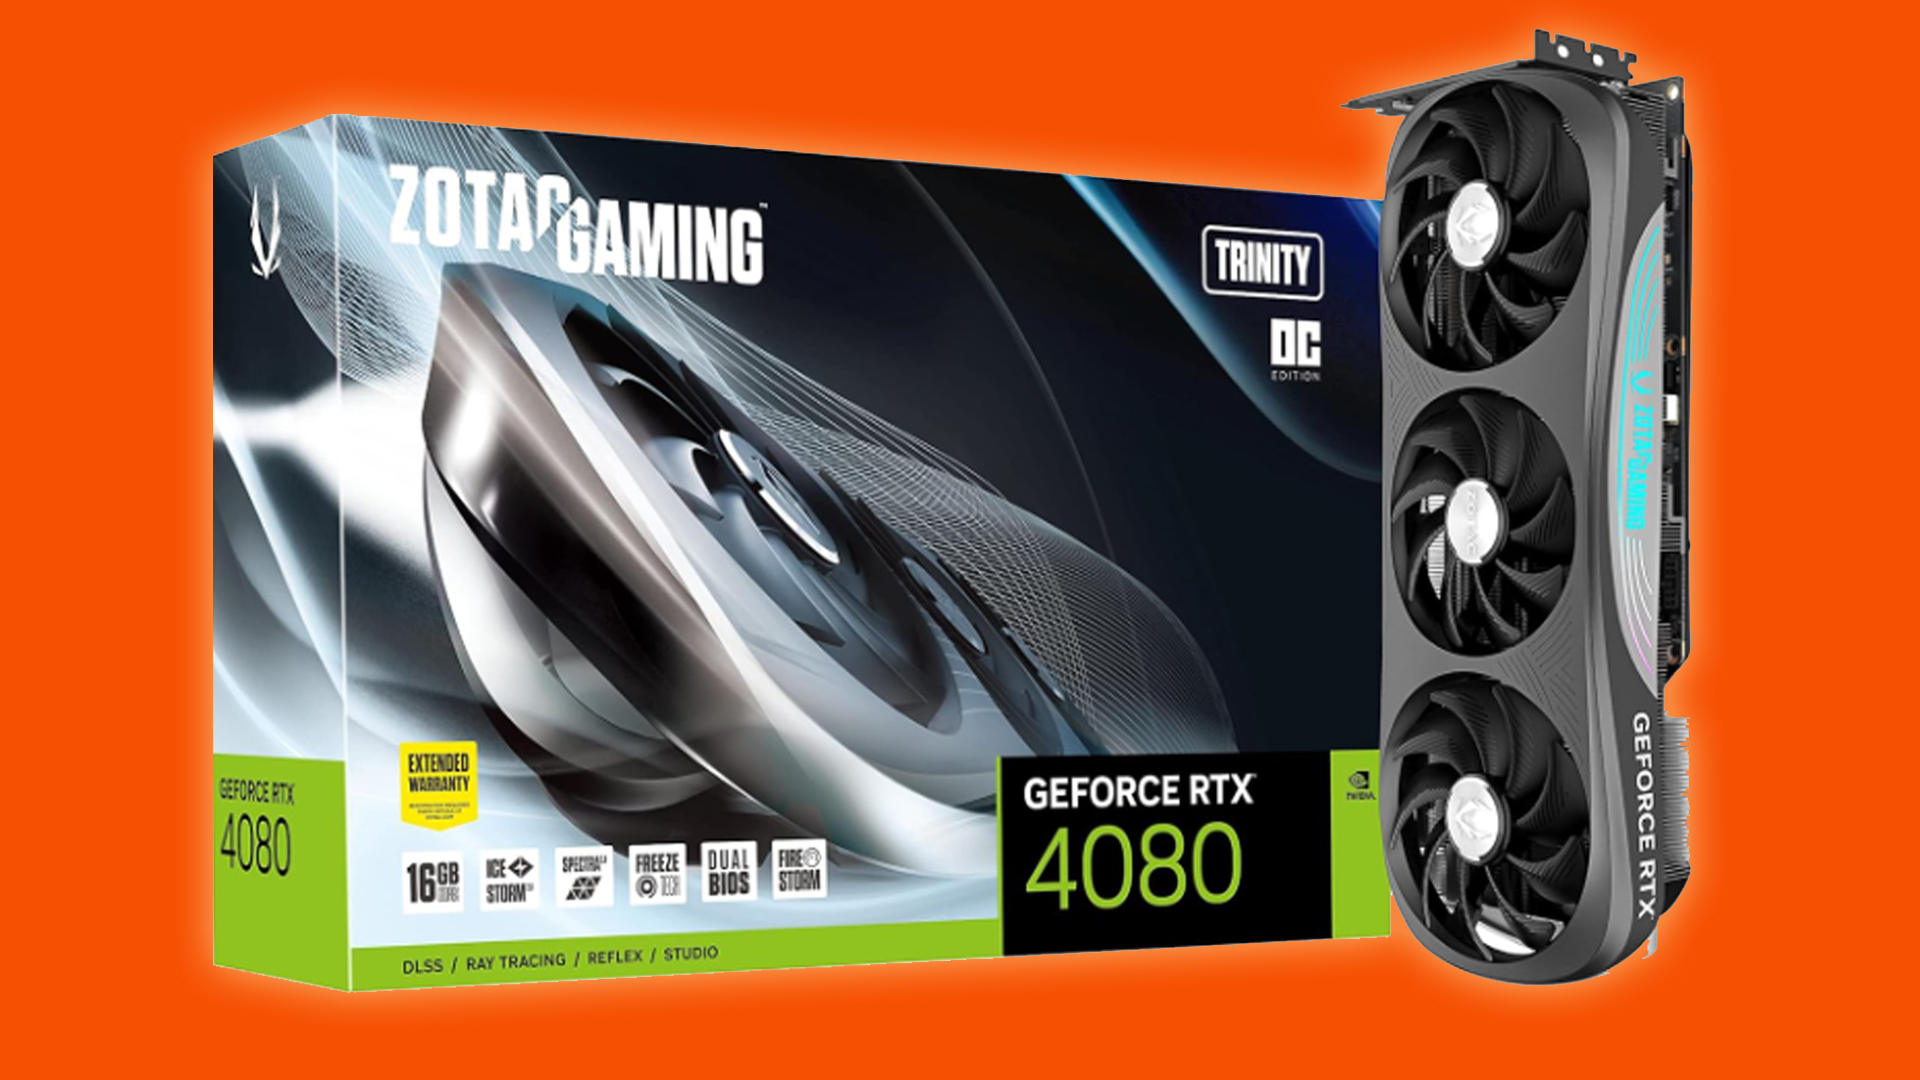 This Nvidia RTX 4080 has never been cheaper thanks to Amazon Prime Day